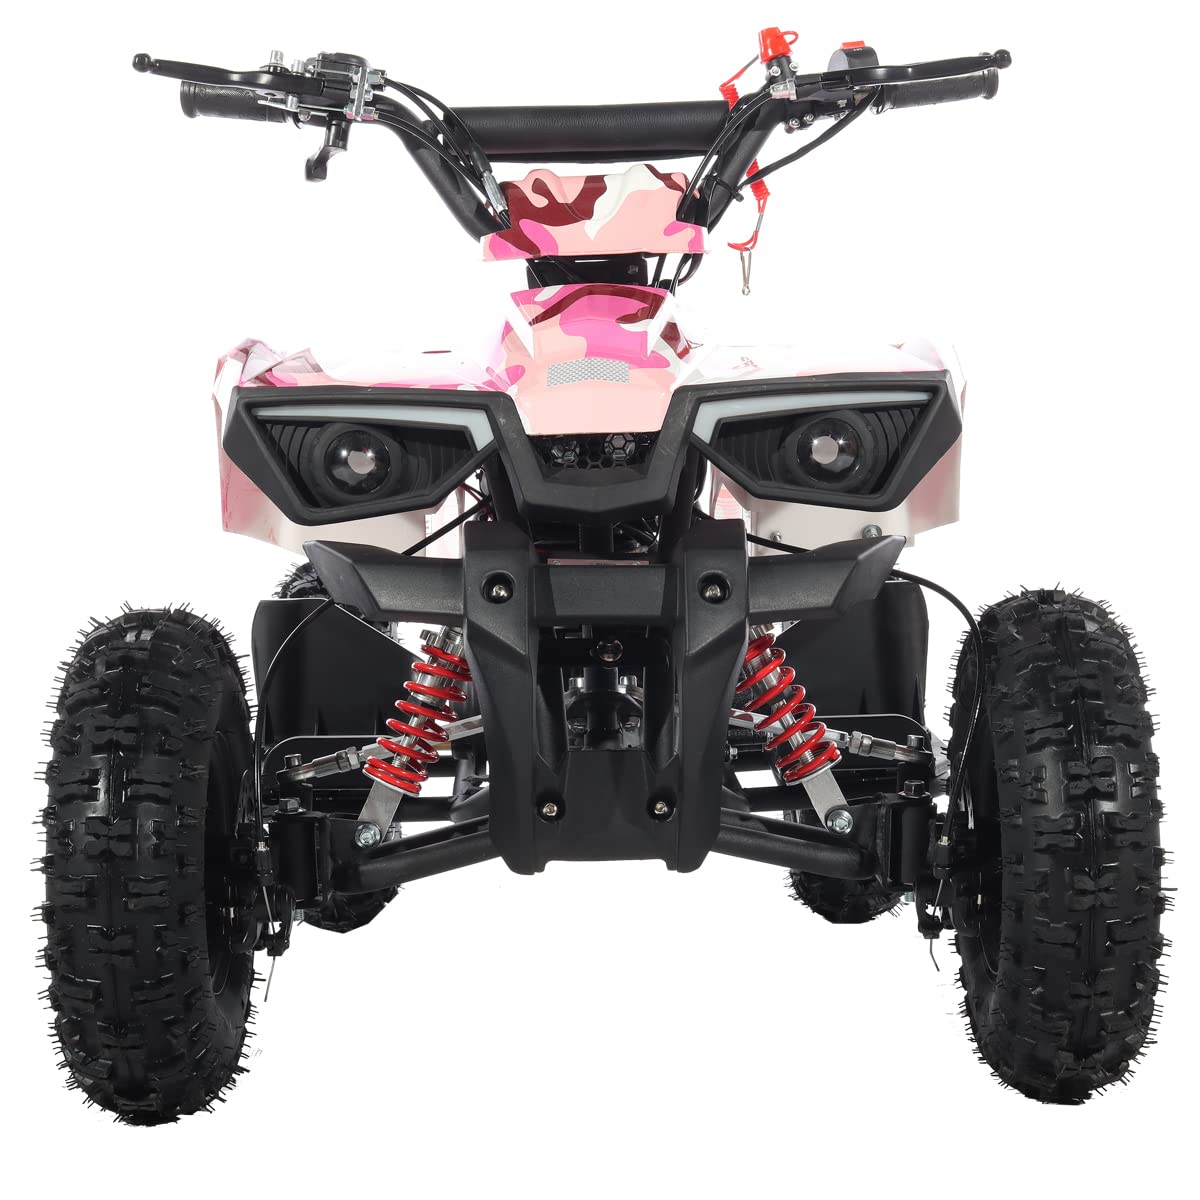 X-PRO Bolt 40cc ATV with Chain Transmission, Pull Start! Disc Brake! 6" Tires! (Pink Camo)